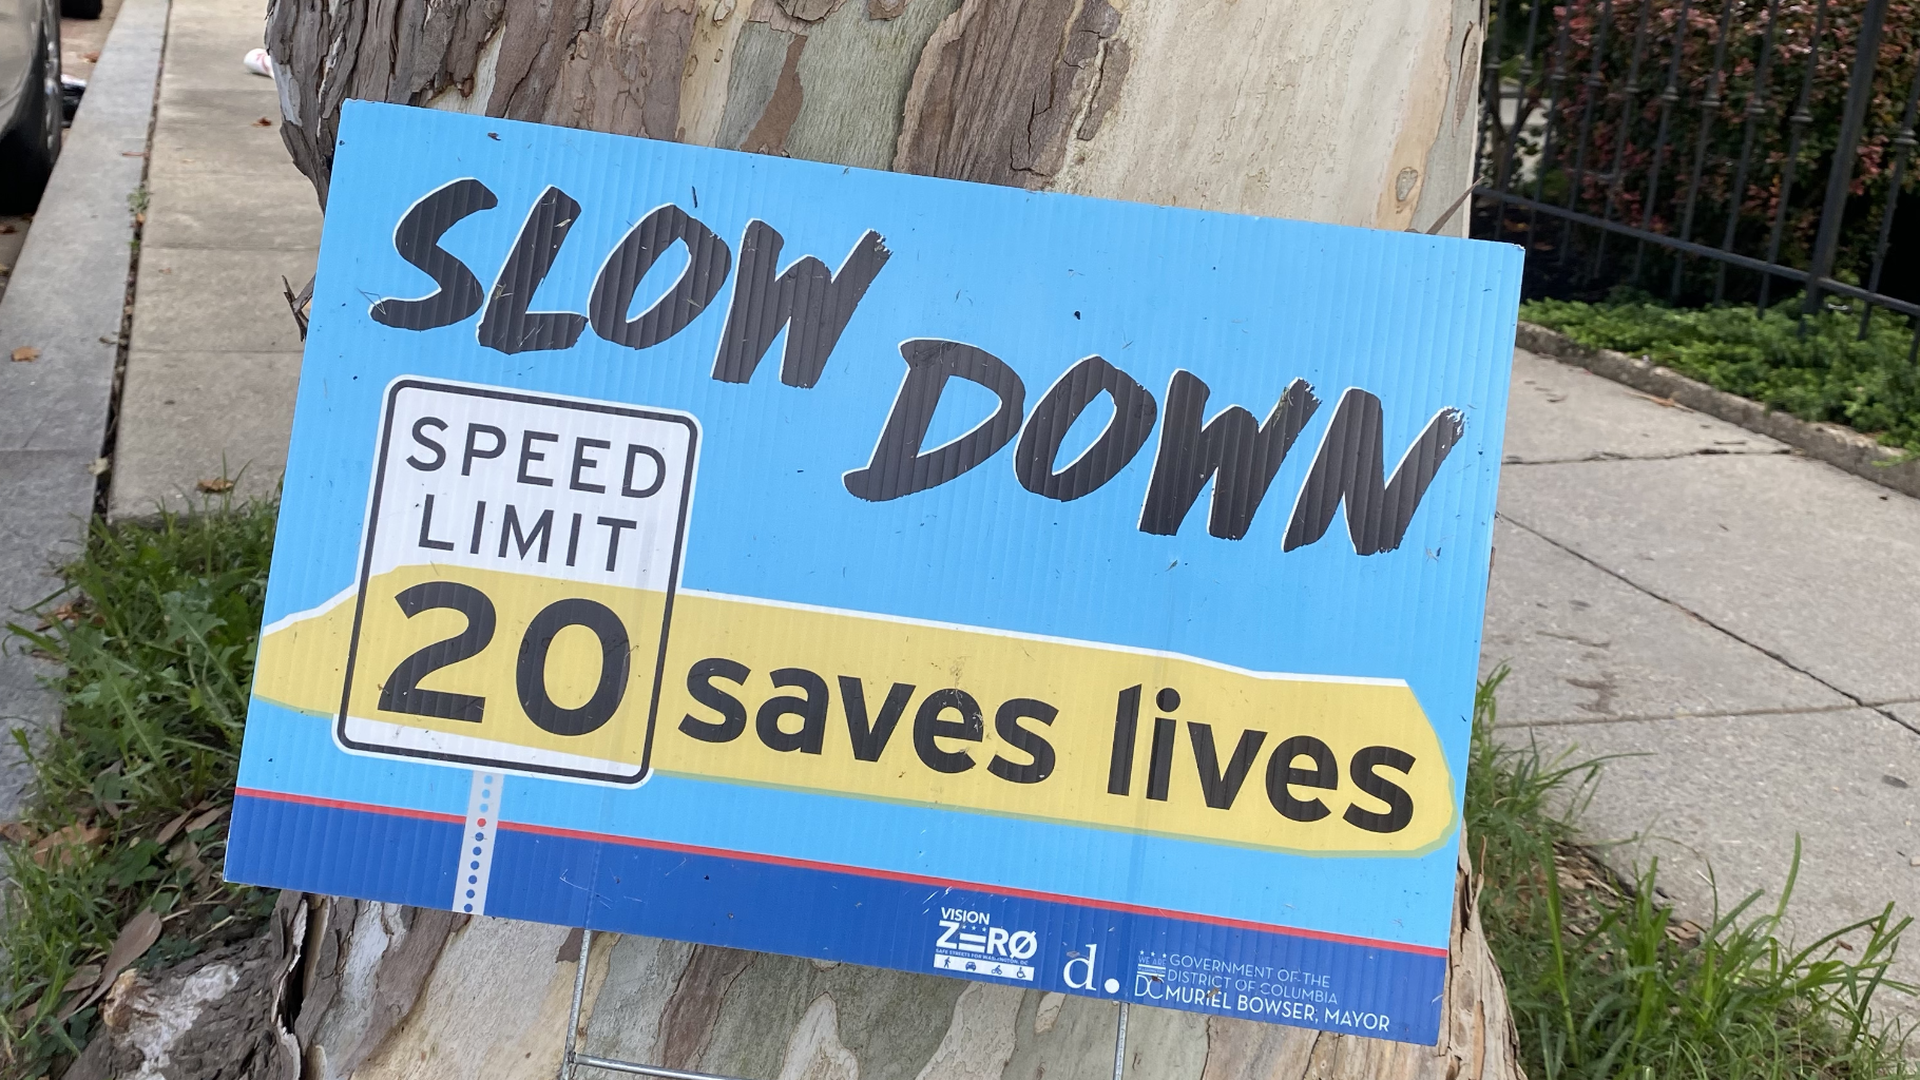 Blue campaign style sign that reads "Slow down 20 (speed limit) saves lives."